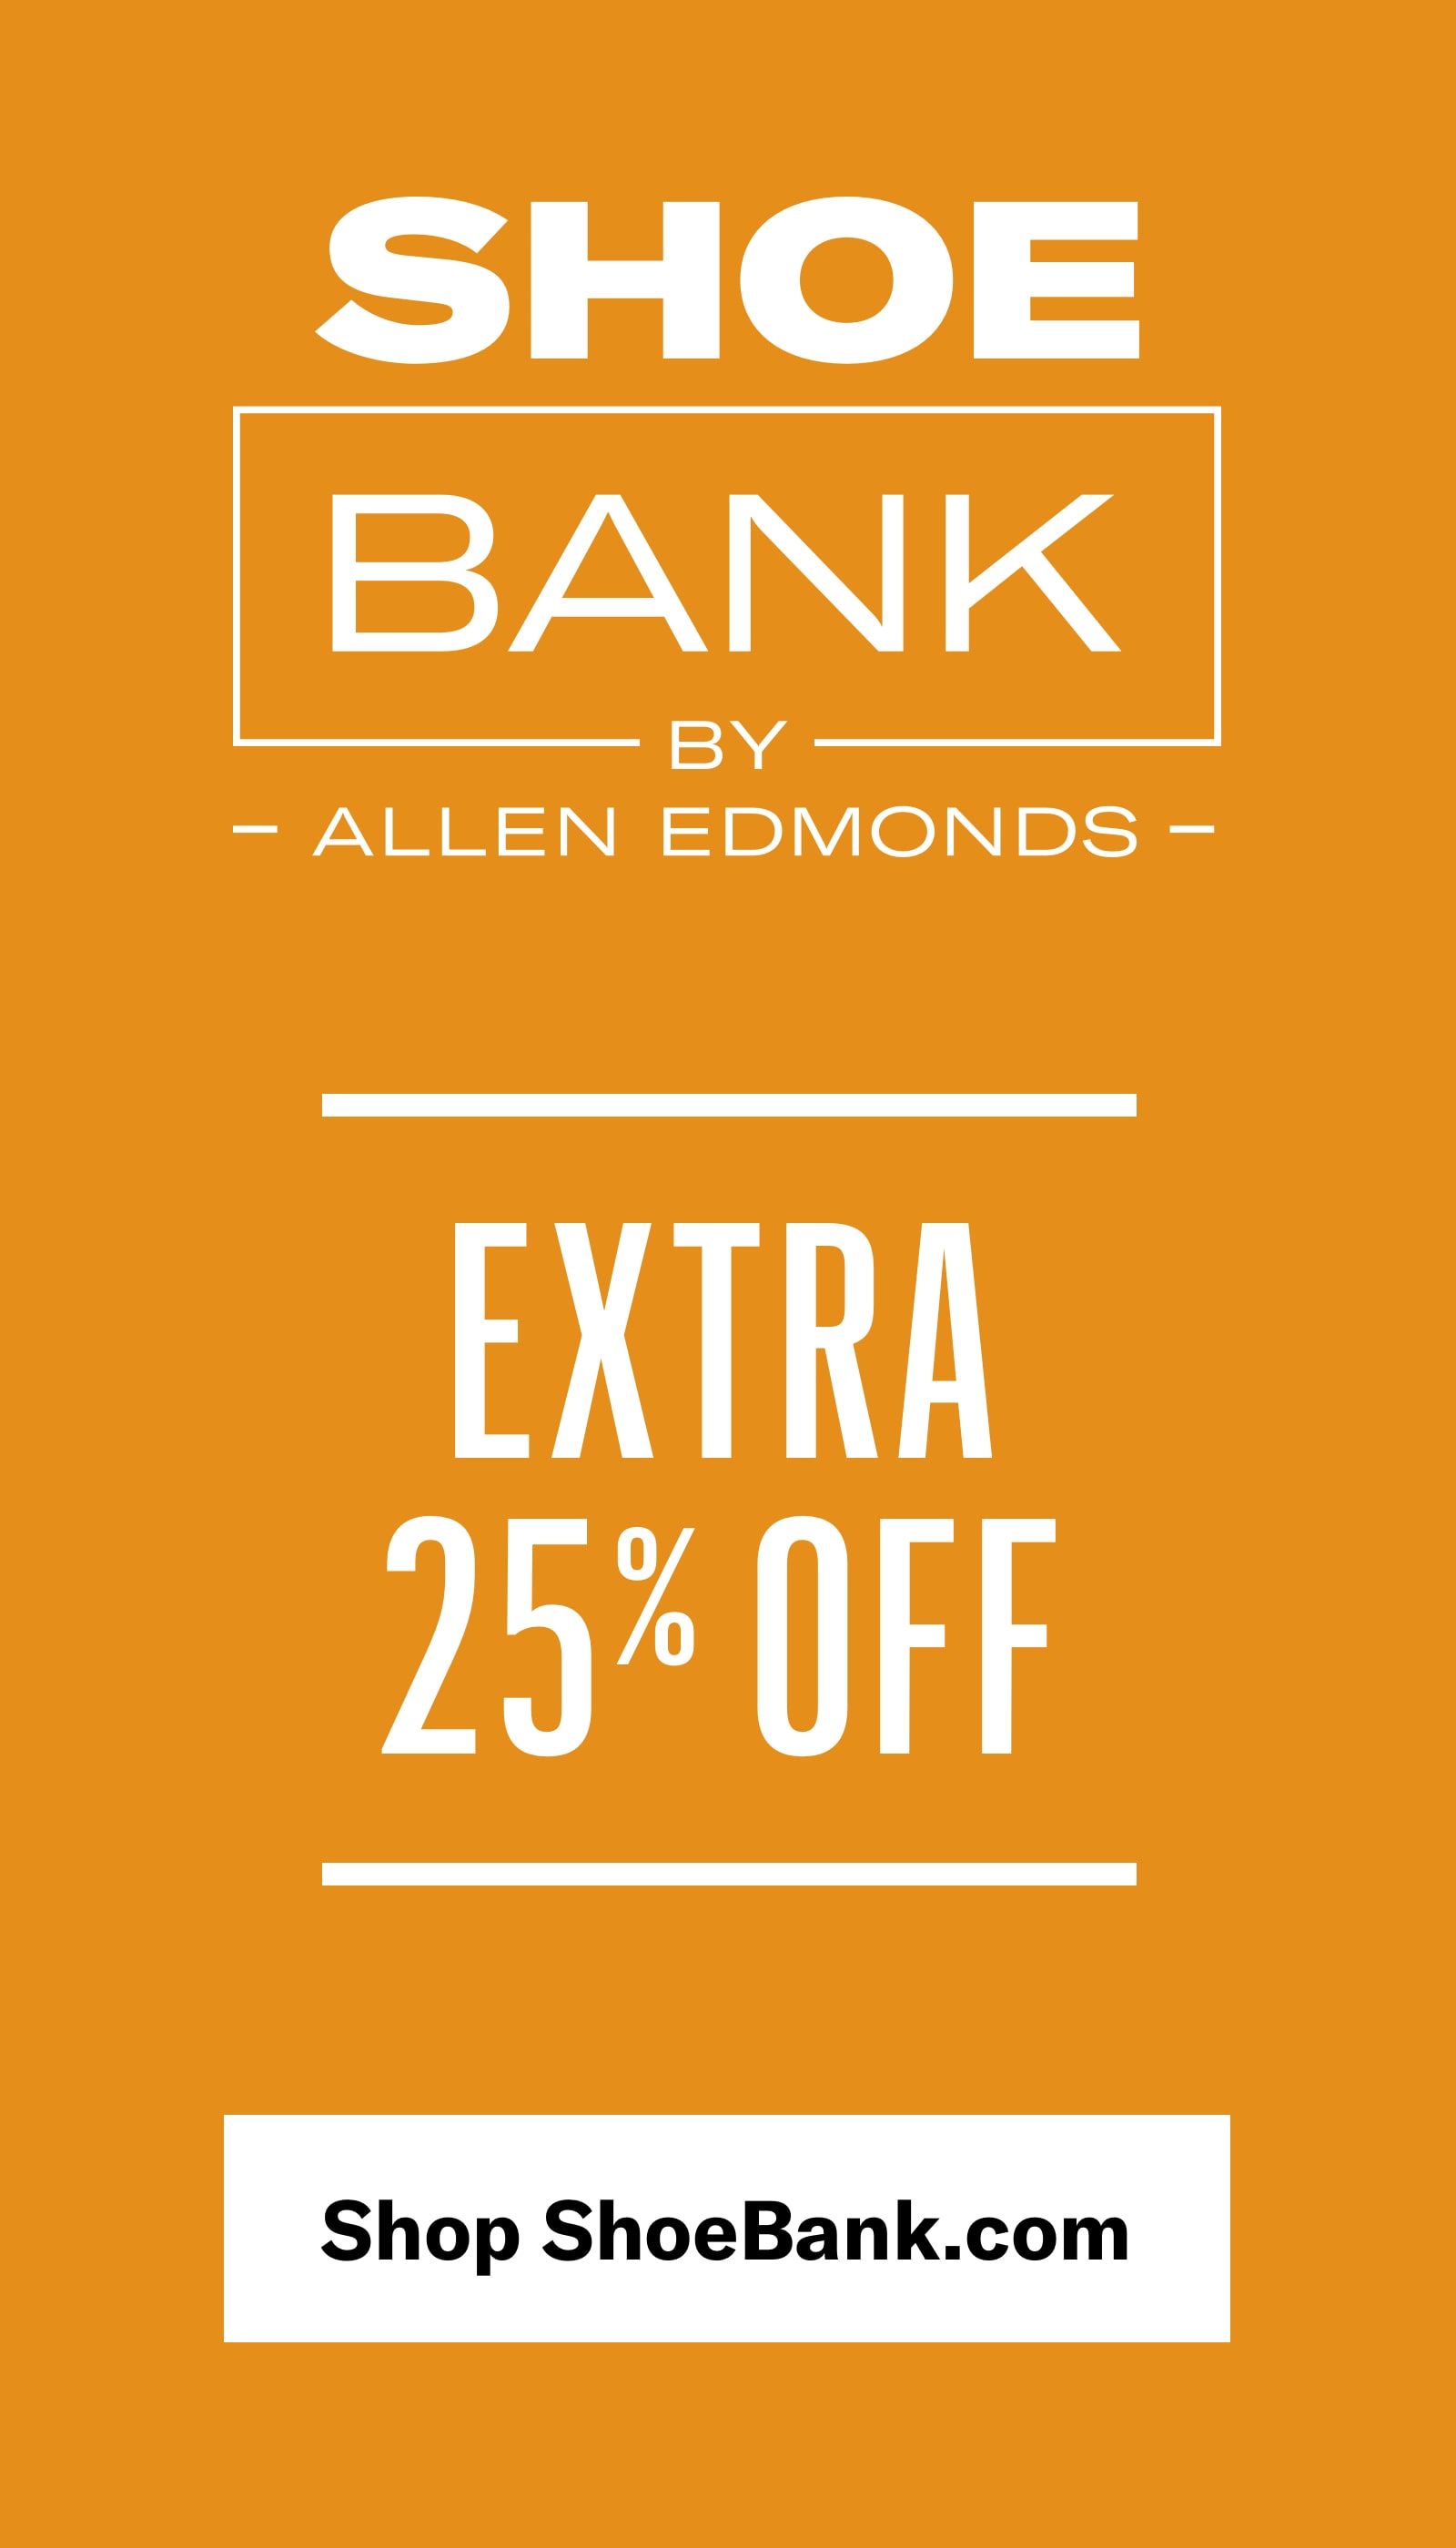 Save an extra 25% off